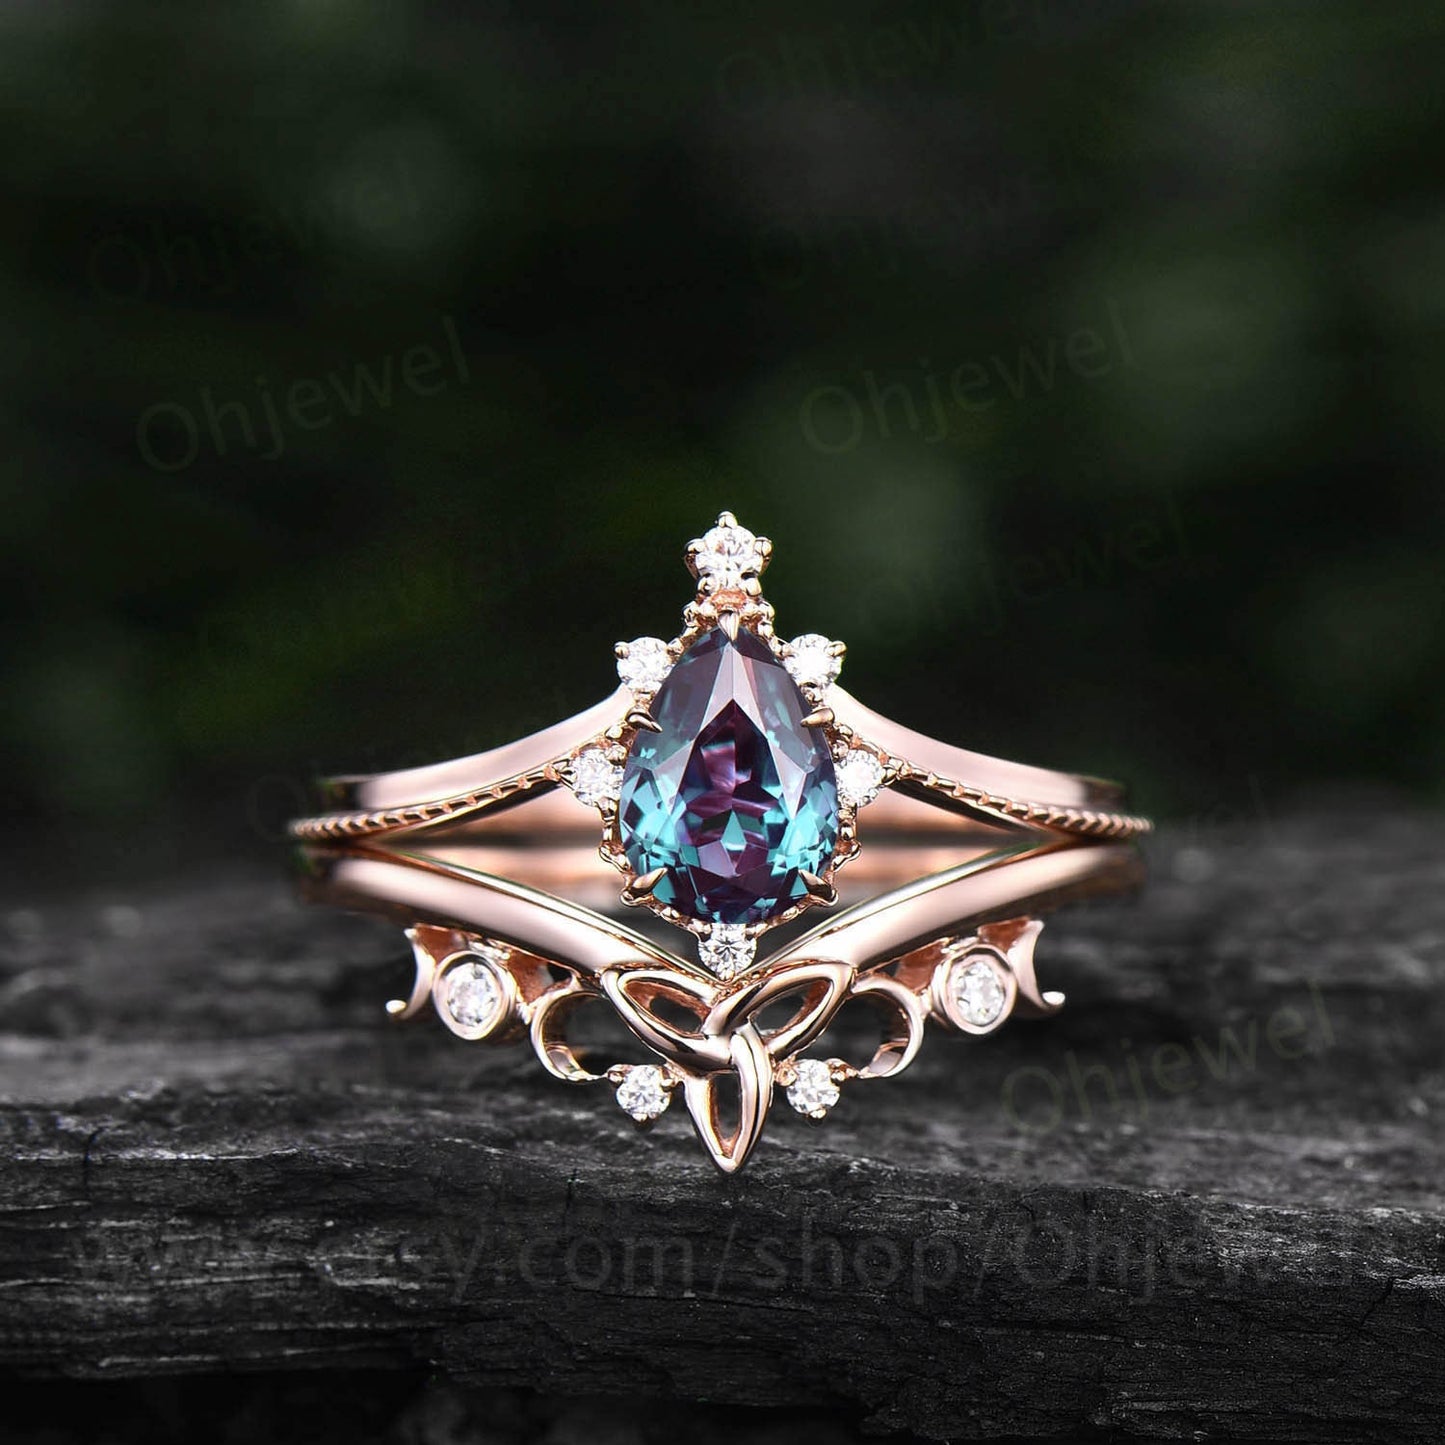 Unique wedding ring set Pear shaped alexandrite engagement ring set white gold vintage moissanite ring for women norse viking ring Jewelry